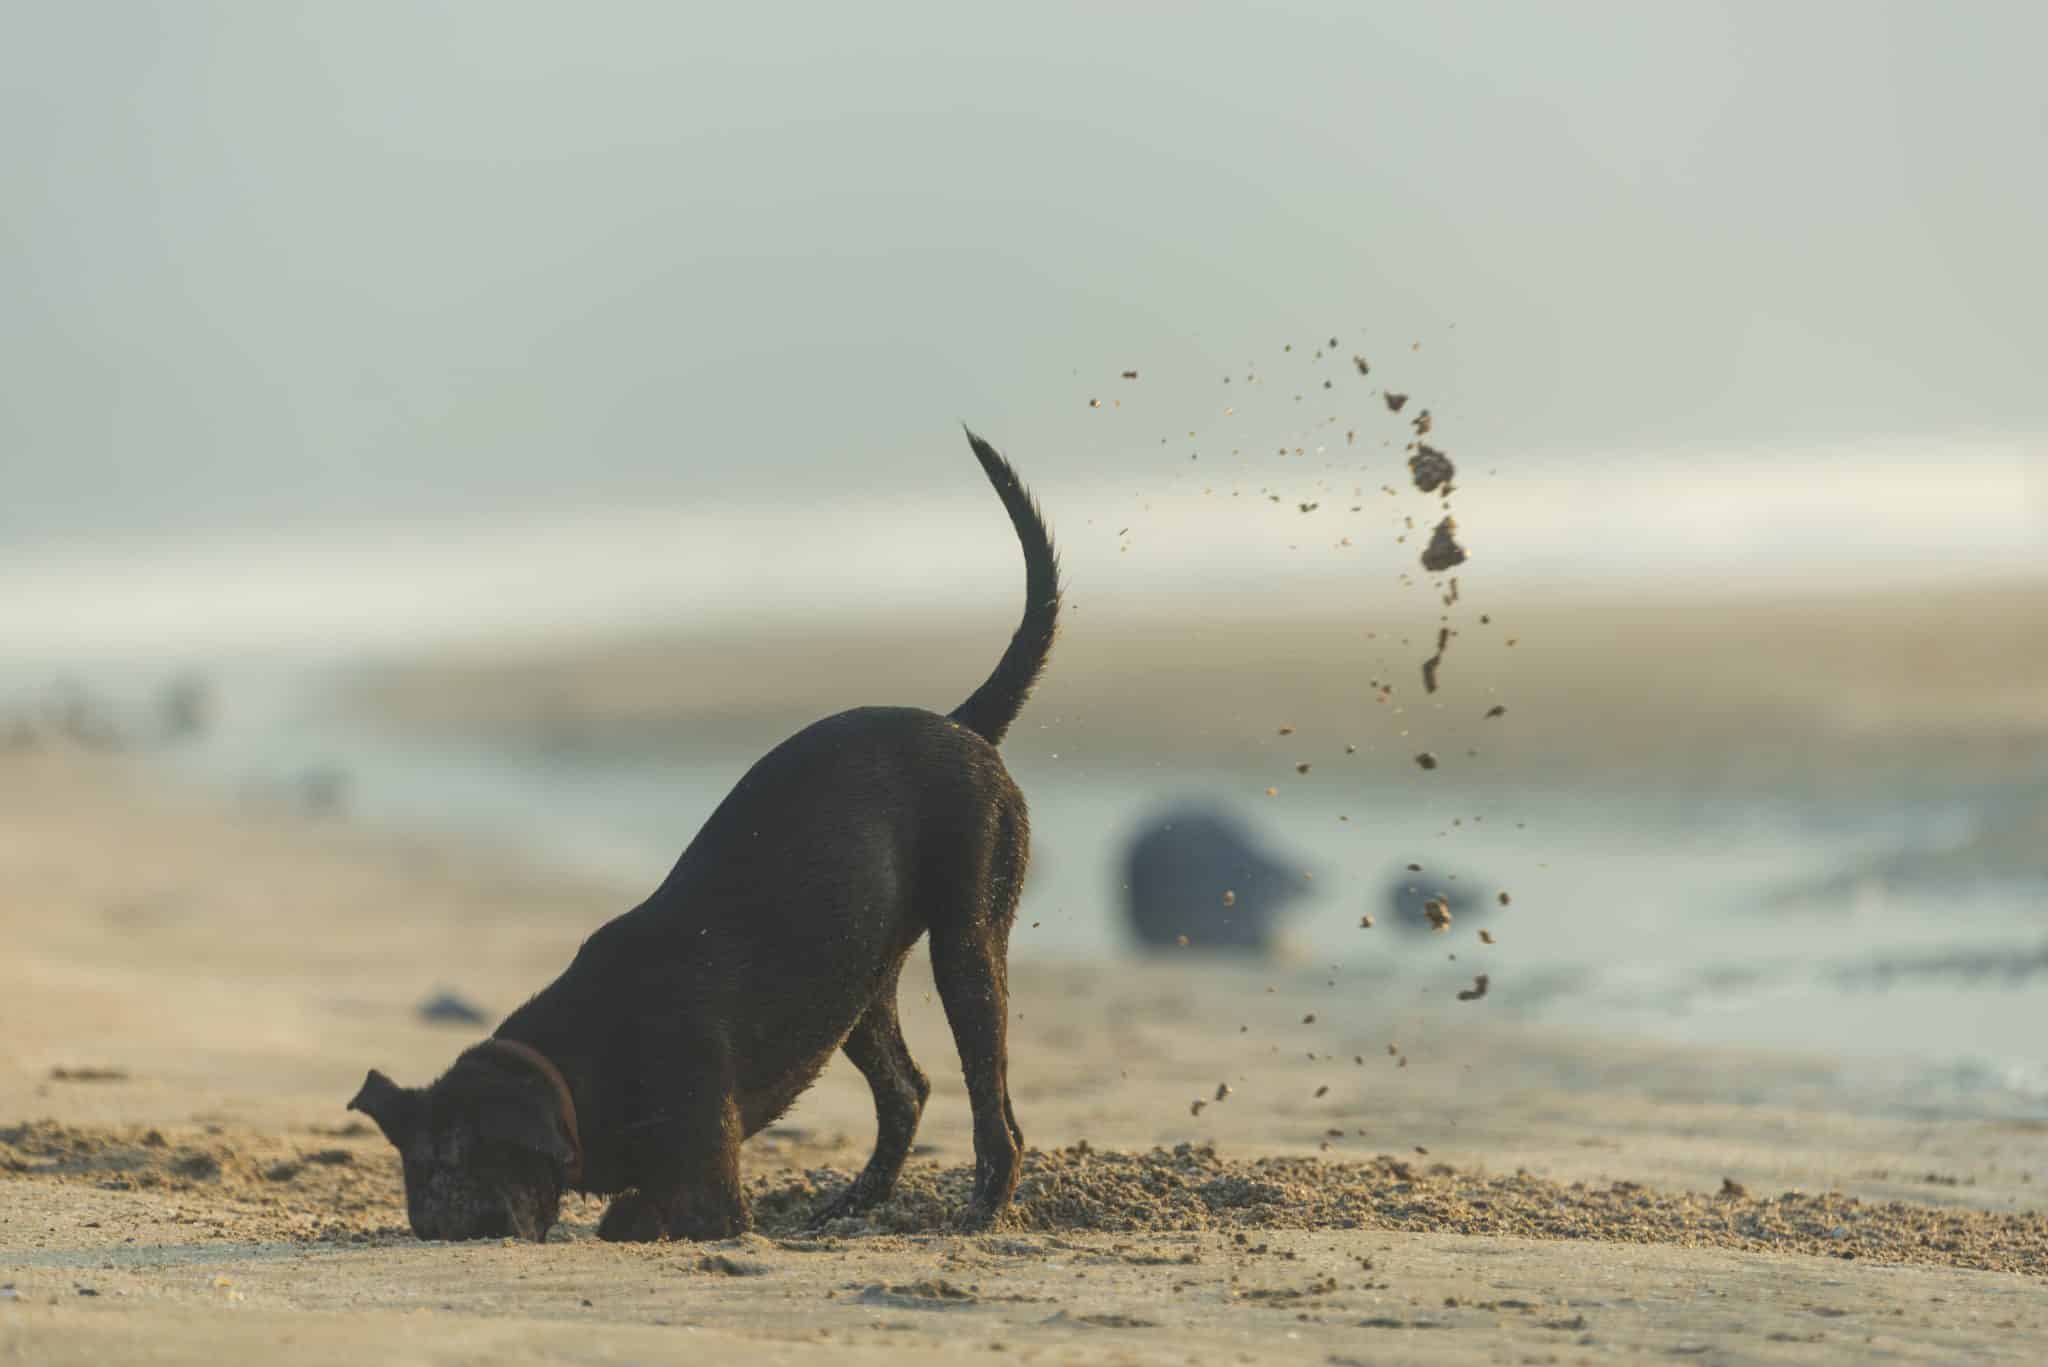 A dog digging a hole in the sand while at the beach.